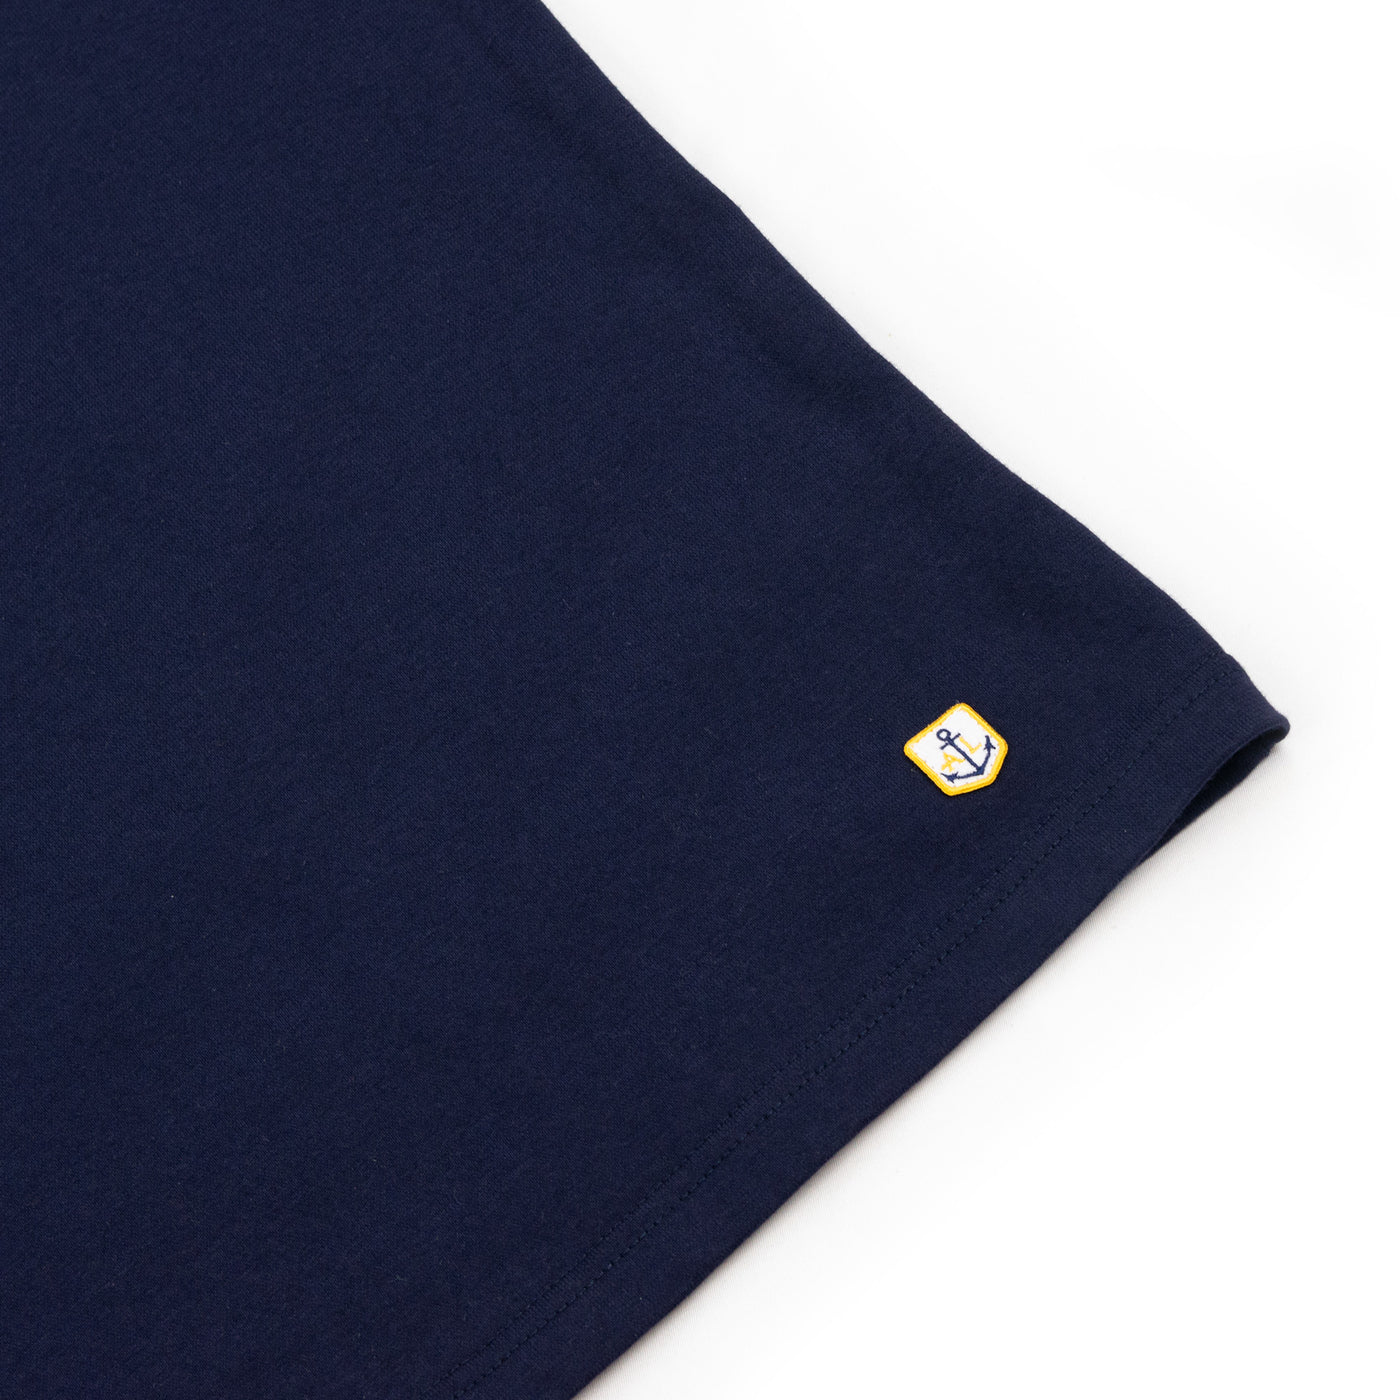 Armor-Lux Heritage 70990 Callac T-Shirt Navire Navy Blue Logo